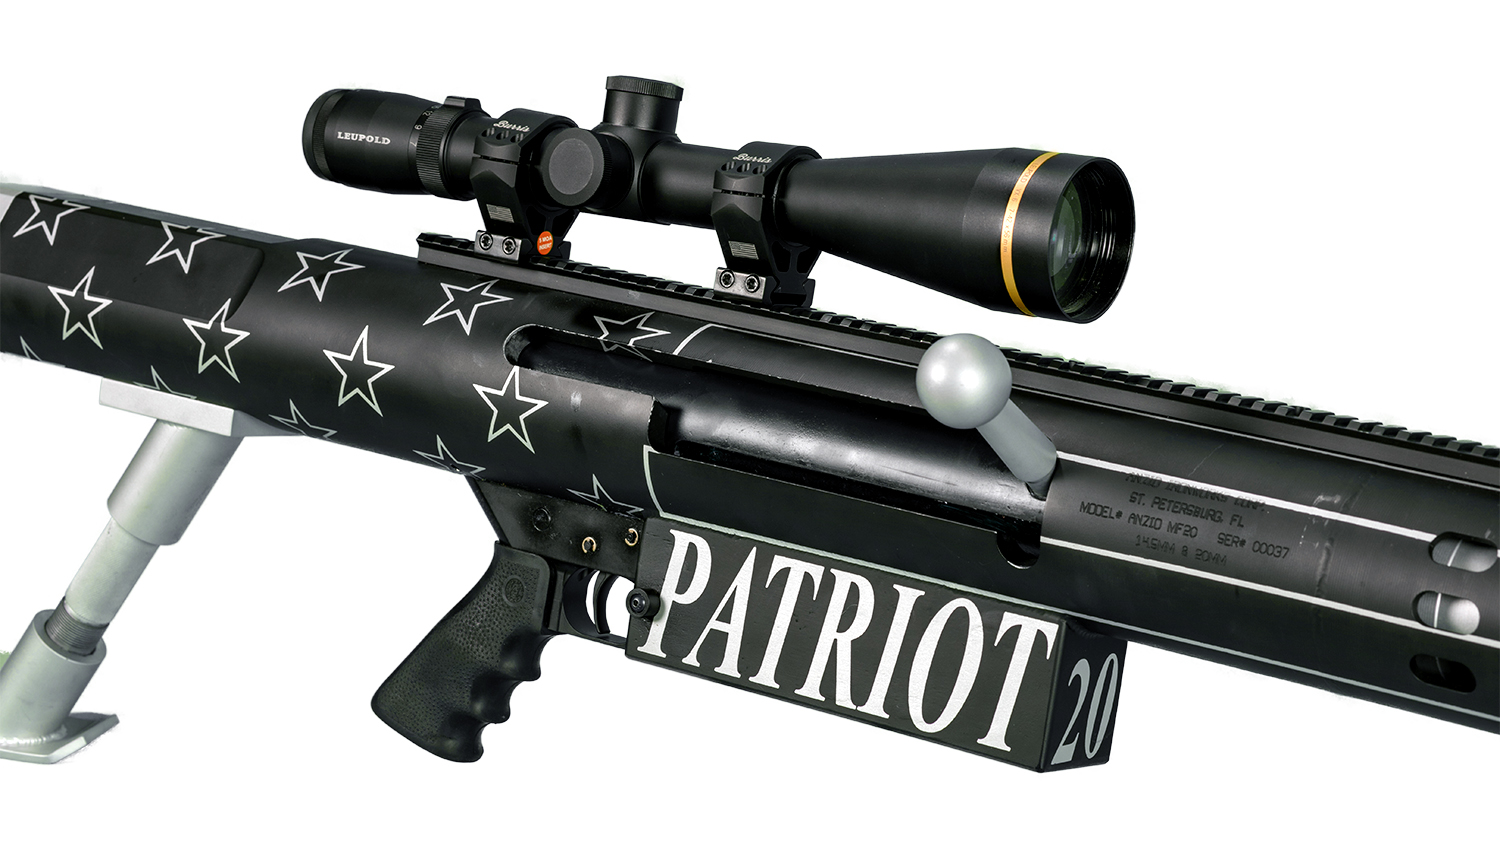 Patriot 20mm Rifle and Big Shot Ranch Shooting Experience Up for Auction on Gunbroker.com